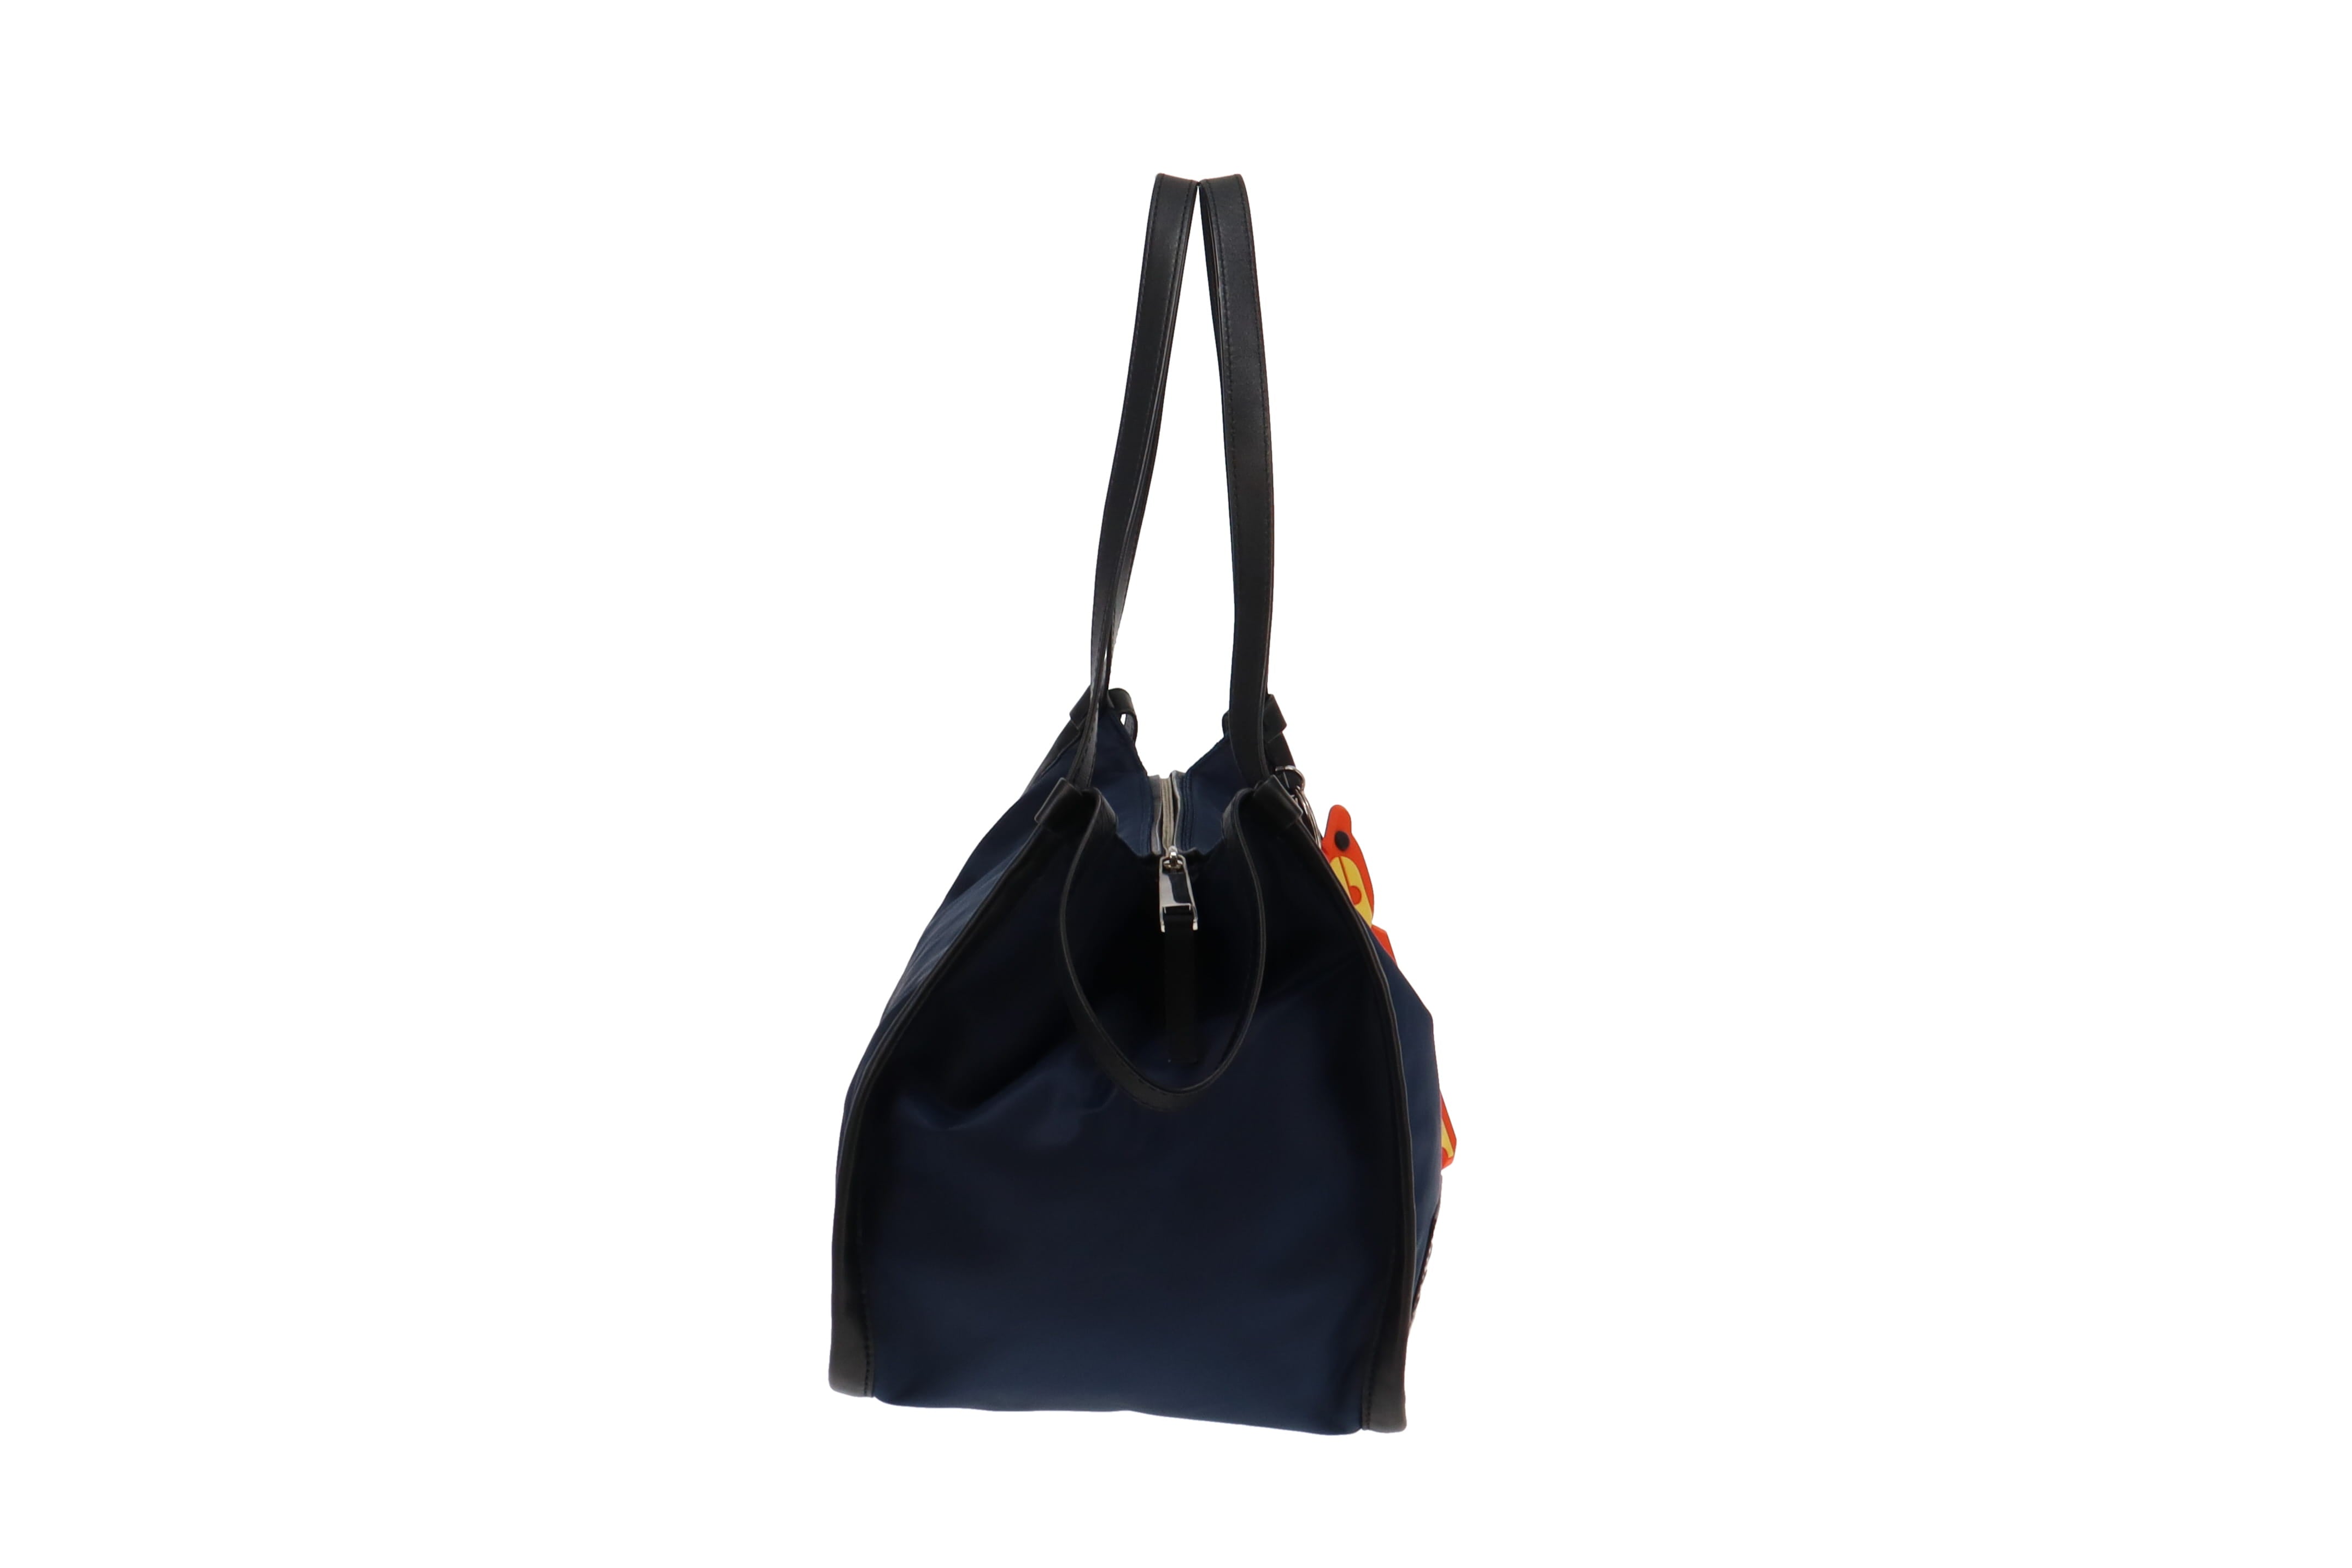 MARK JACOBS SPORT TOTE NAVY￥47300